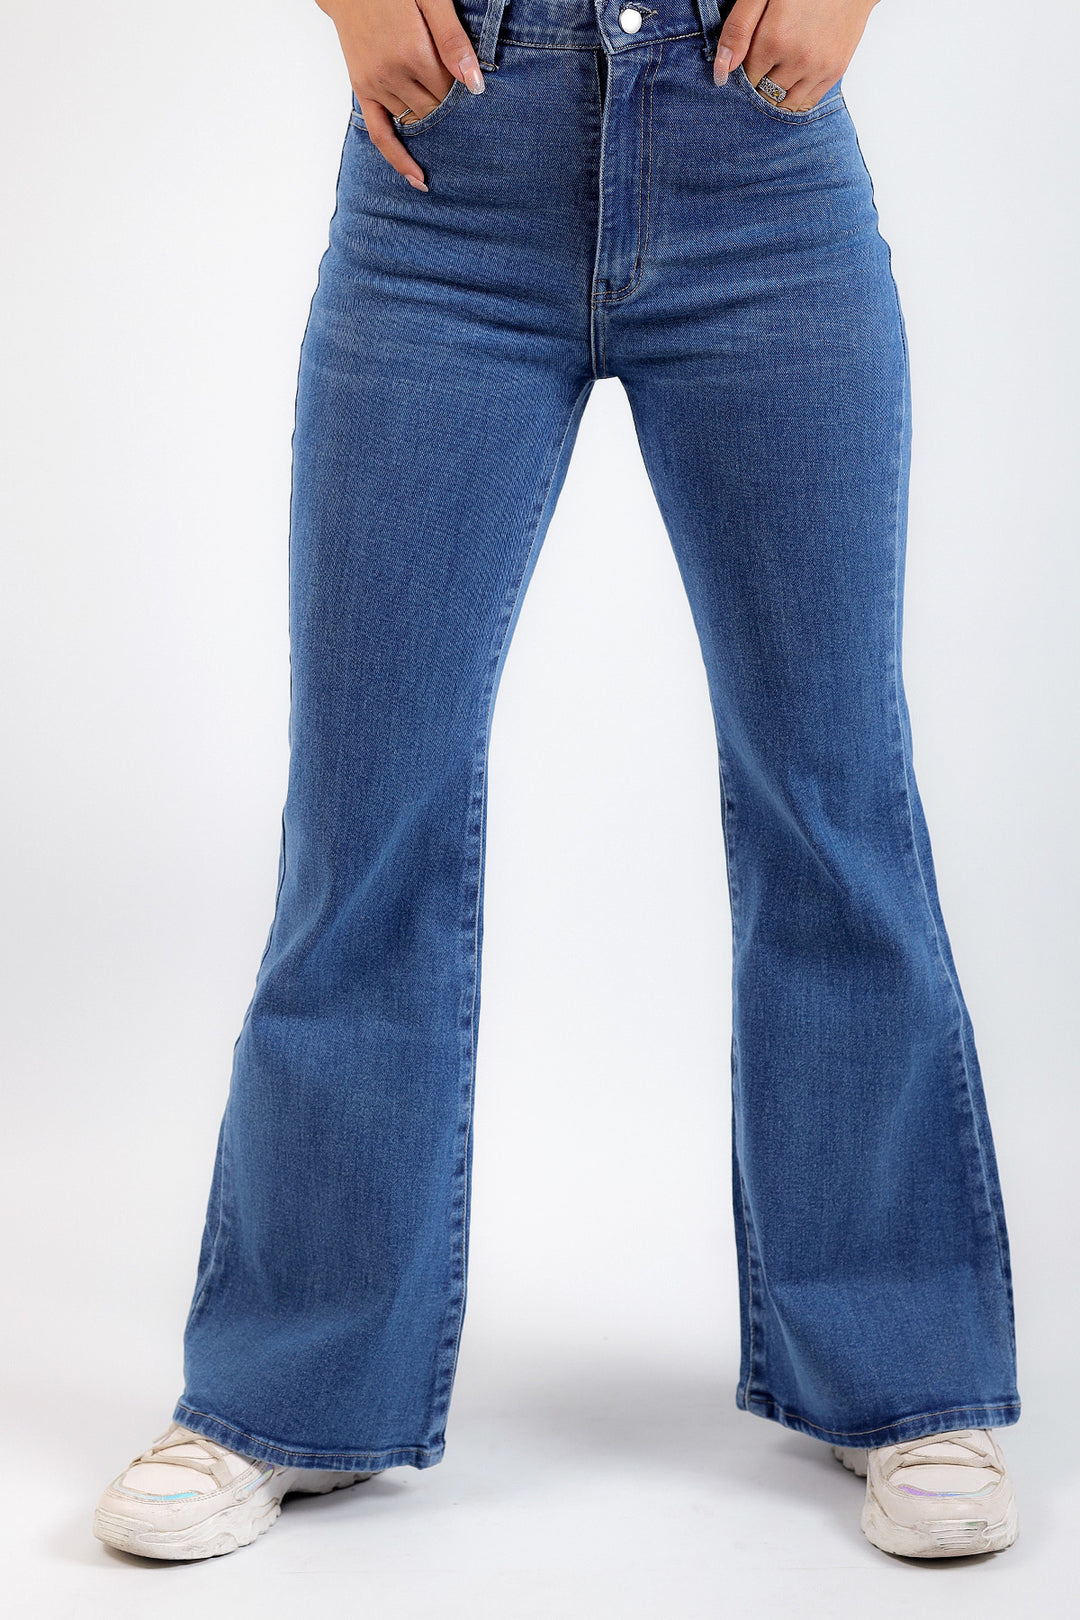 Aqua Blue Women's Jeans with Boot Cut and Whisker Wash